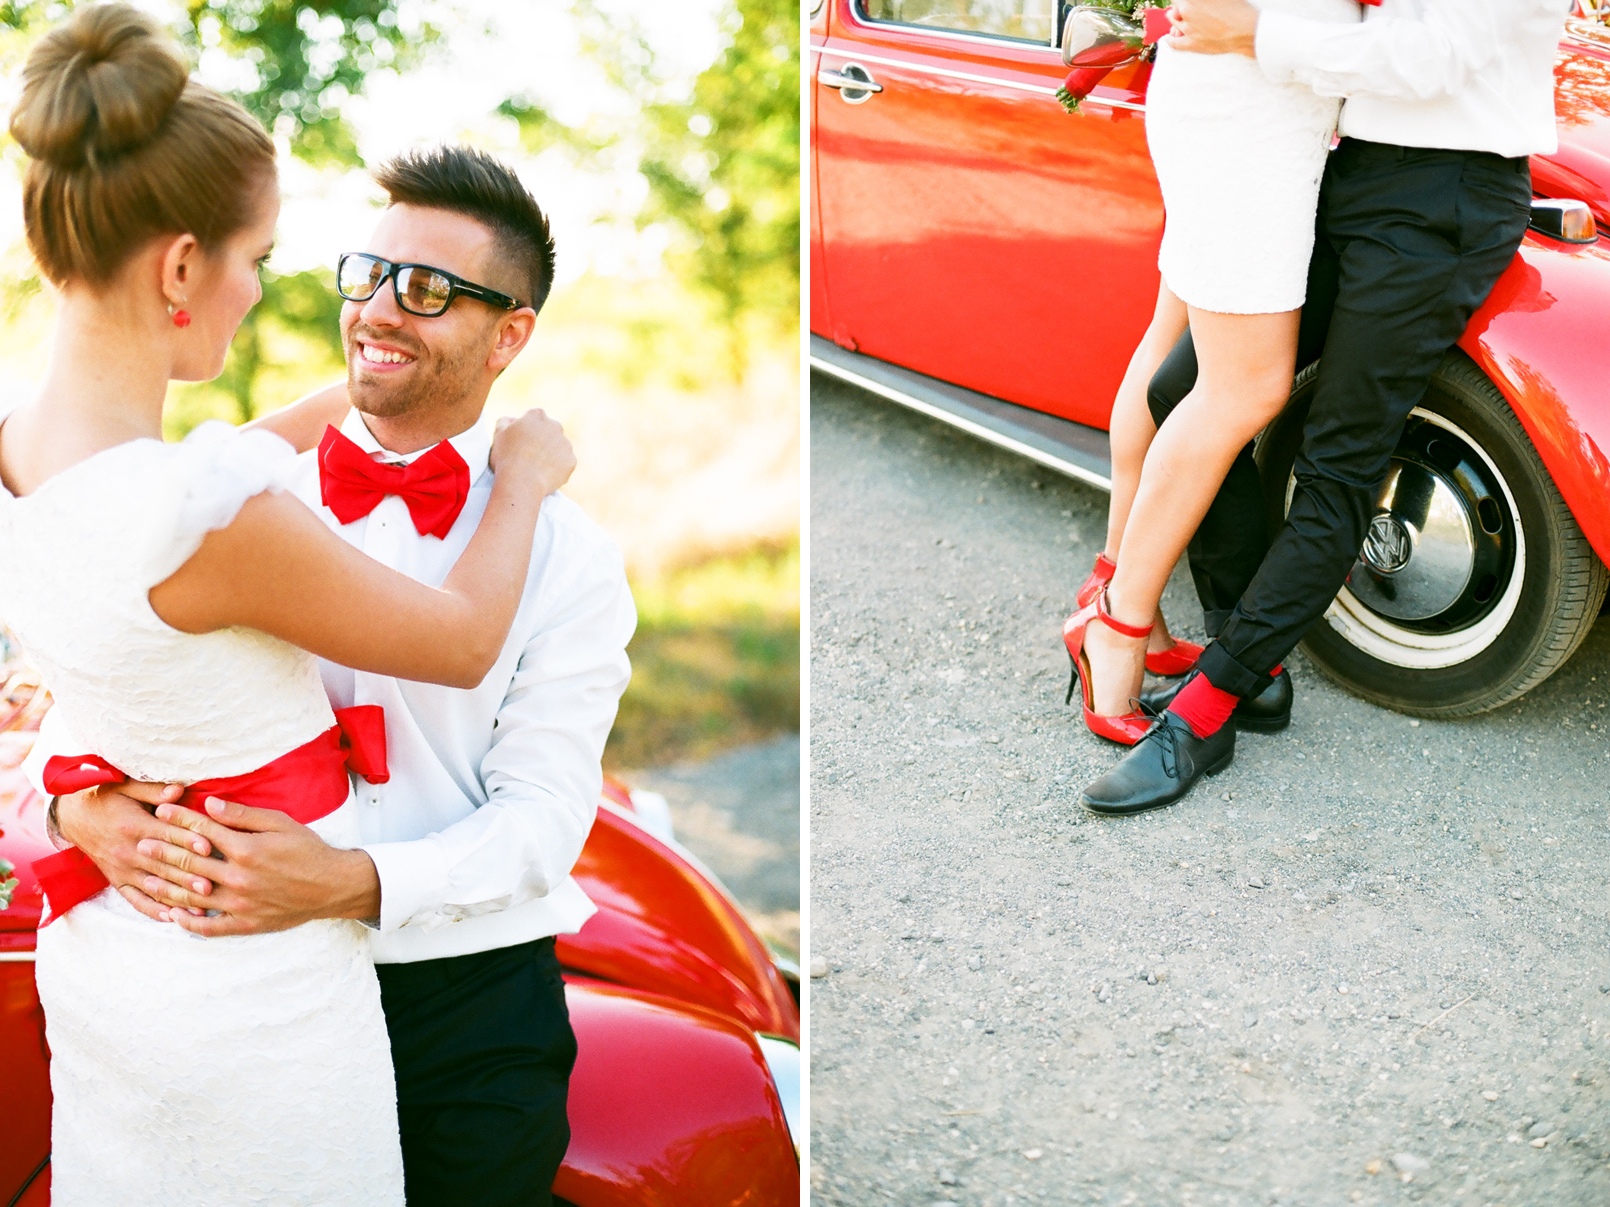 1960s Inspired Love Shoot for Valentines Day from Bell Studios